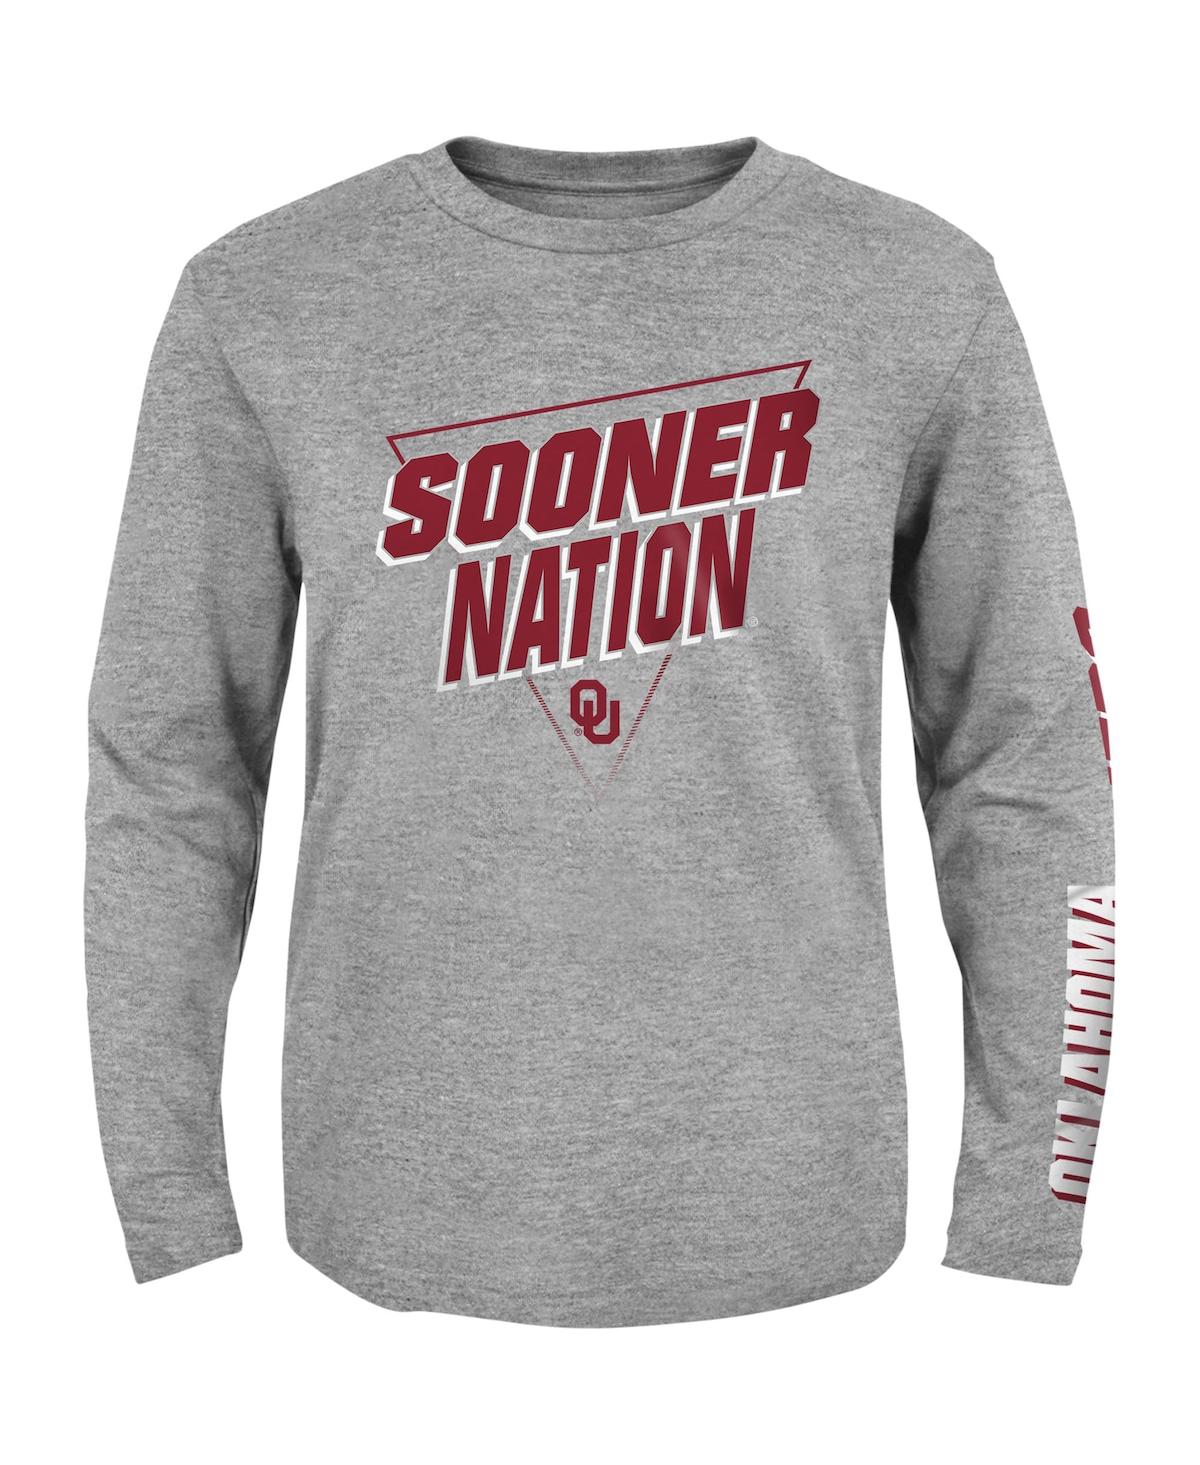 Shop Outerstuff Big Boys Heather Gray Oklahoma Sooners 2-hit For My Team Long Sleeve T-shirt